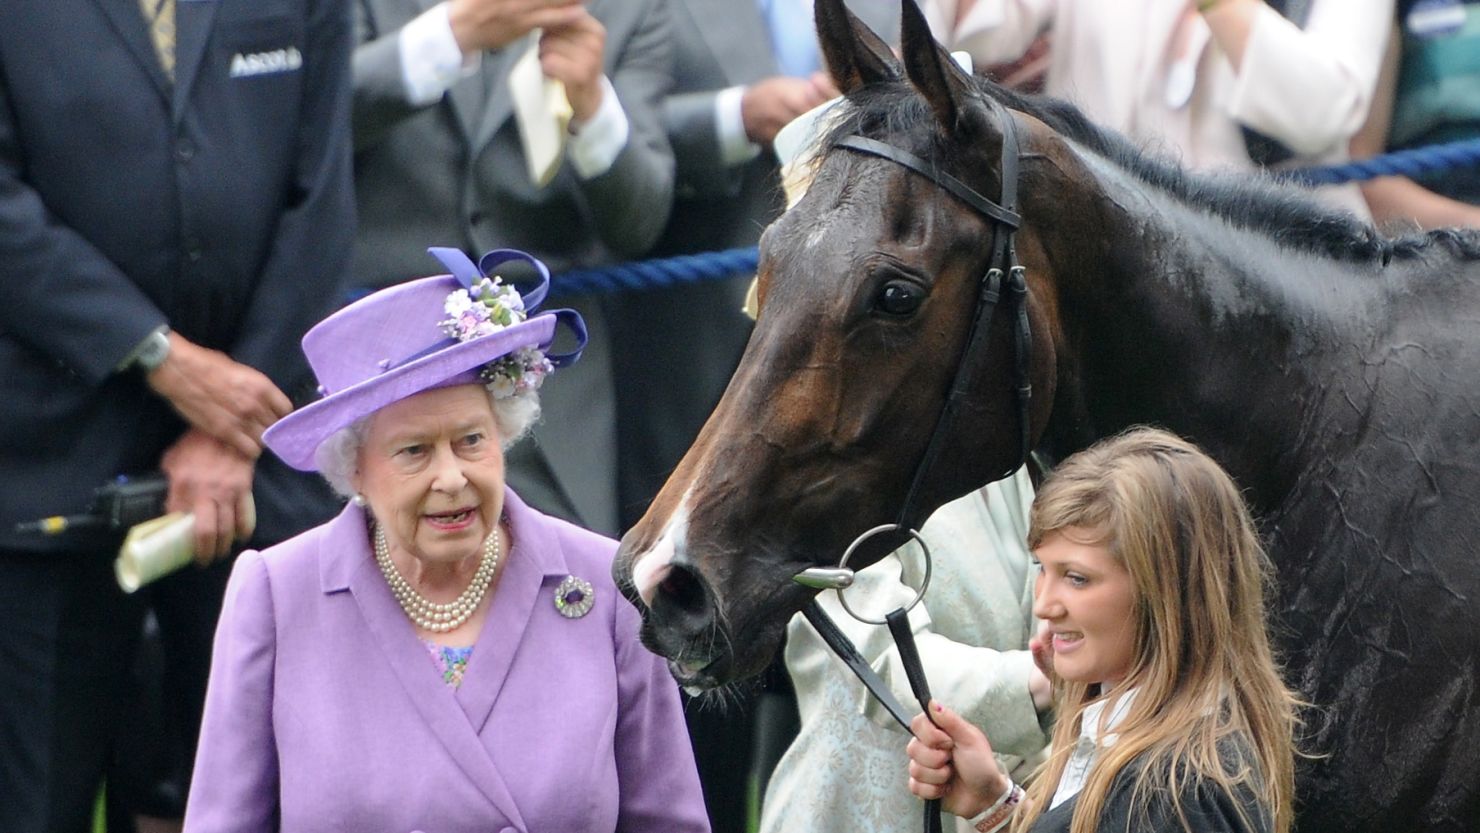 Queen Elizabeth II congratulates her horse Estimate following its Gold Cup win at Royal Ascot in 2013.